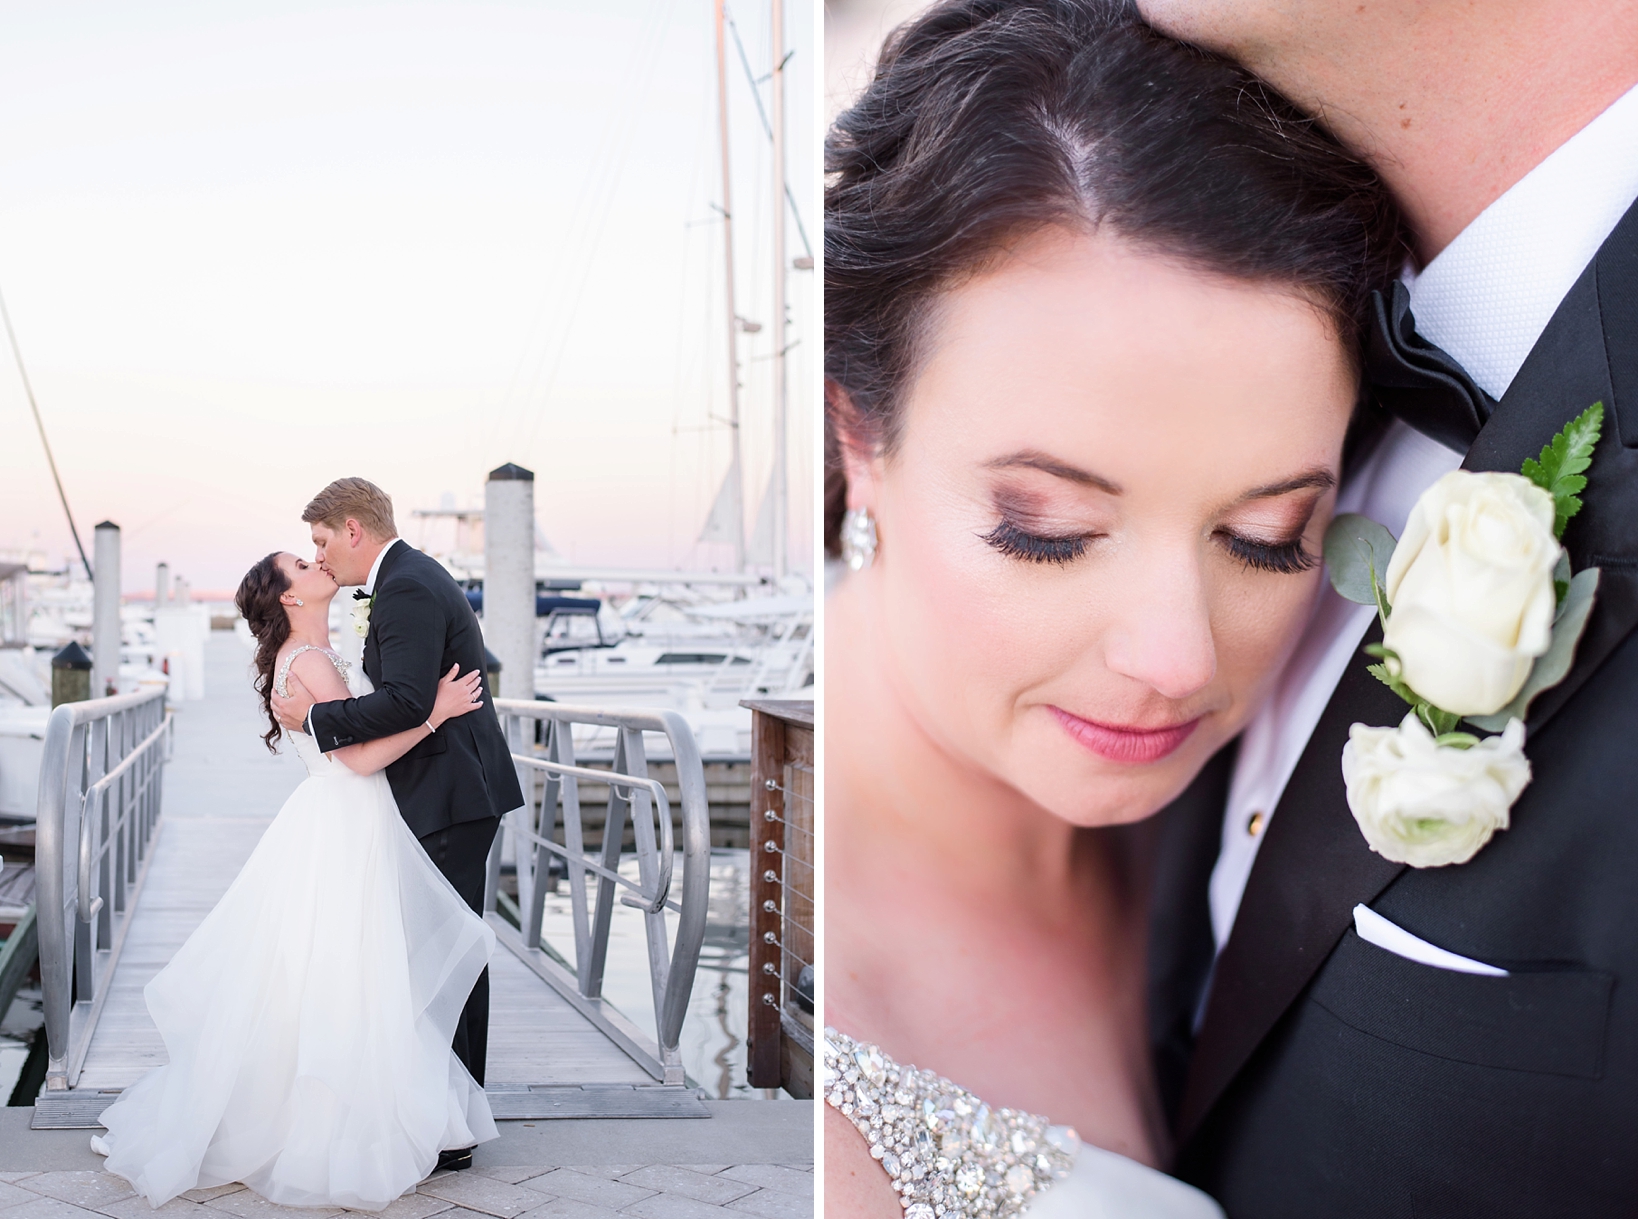 Sunset portraits of the bride and groom by Sarah & Ben Photography